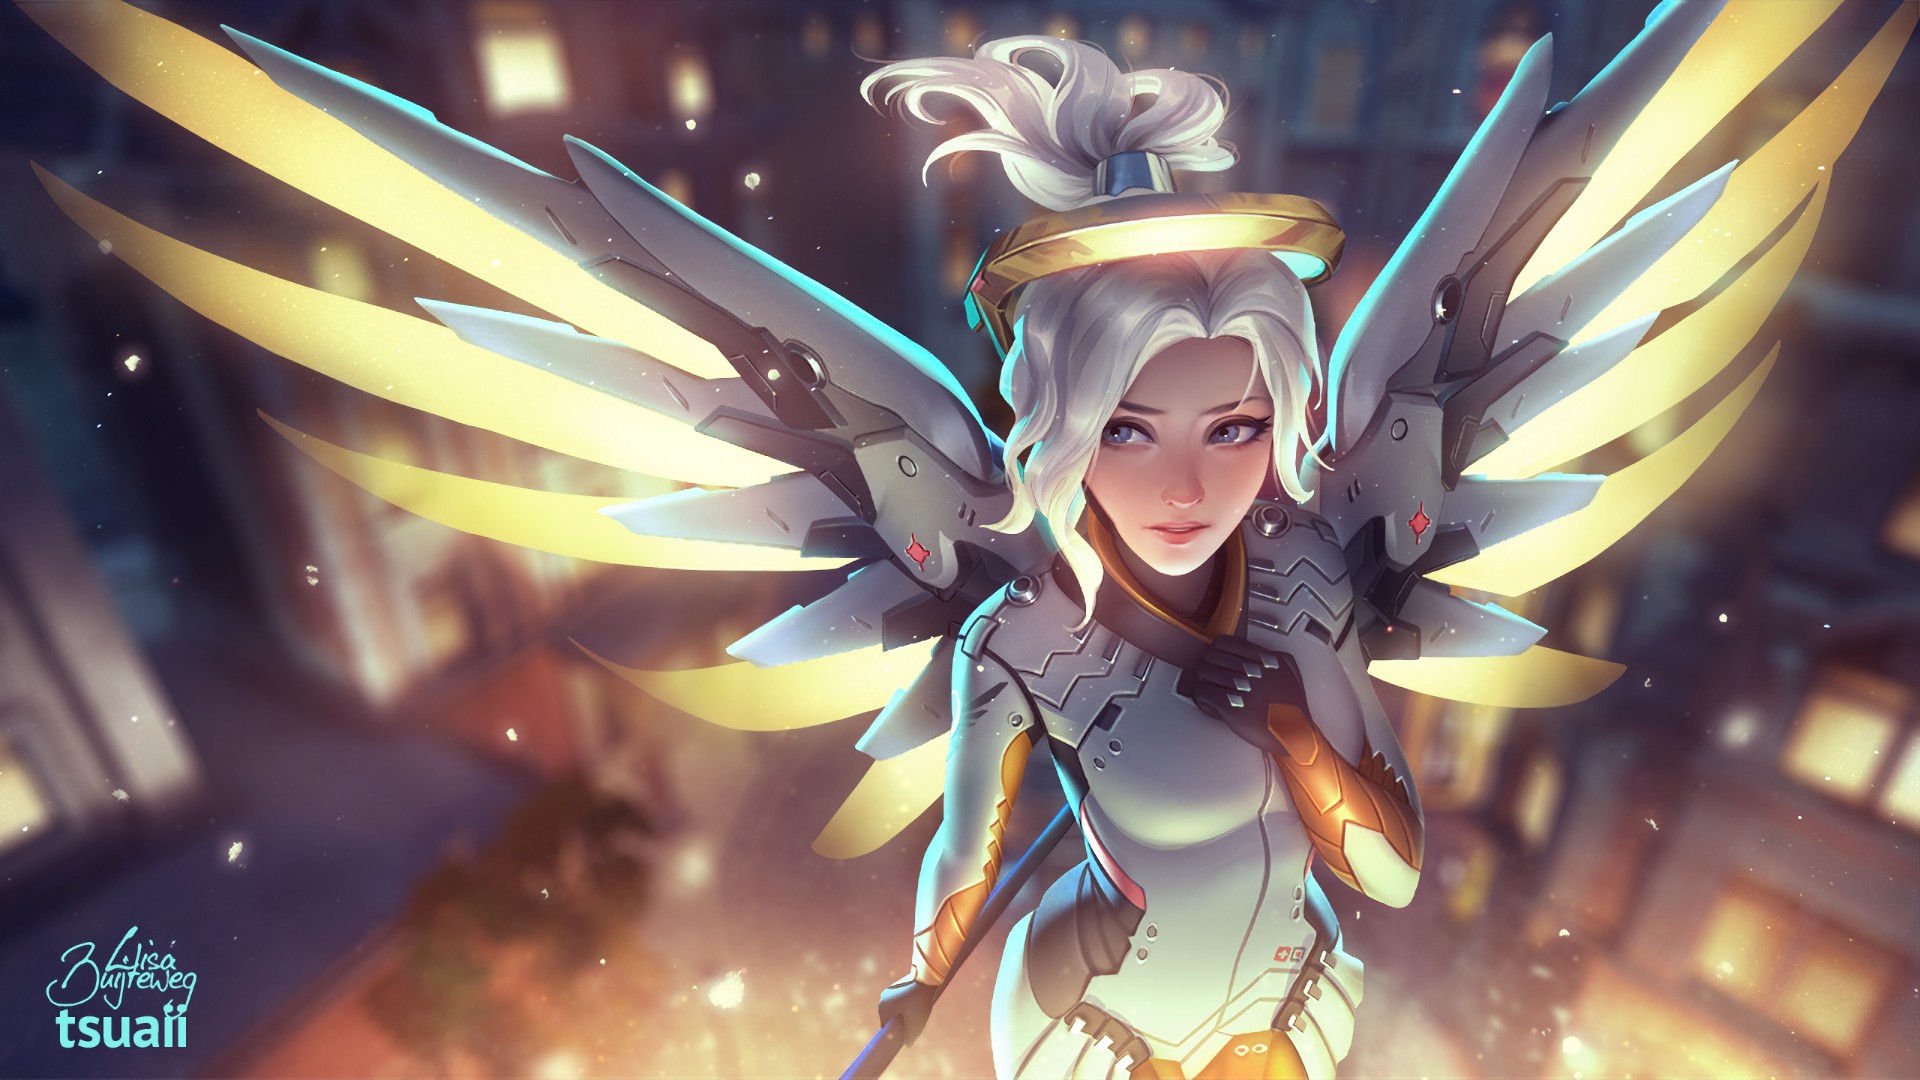 Mercy Overwatch wallpaper ·① Download free cool full HD ...
